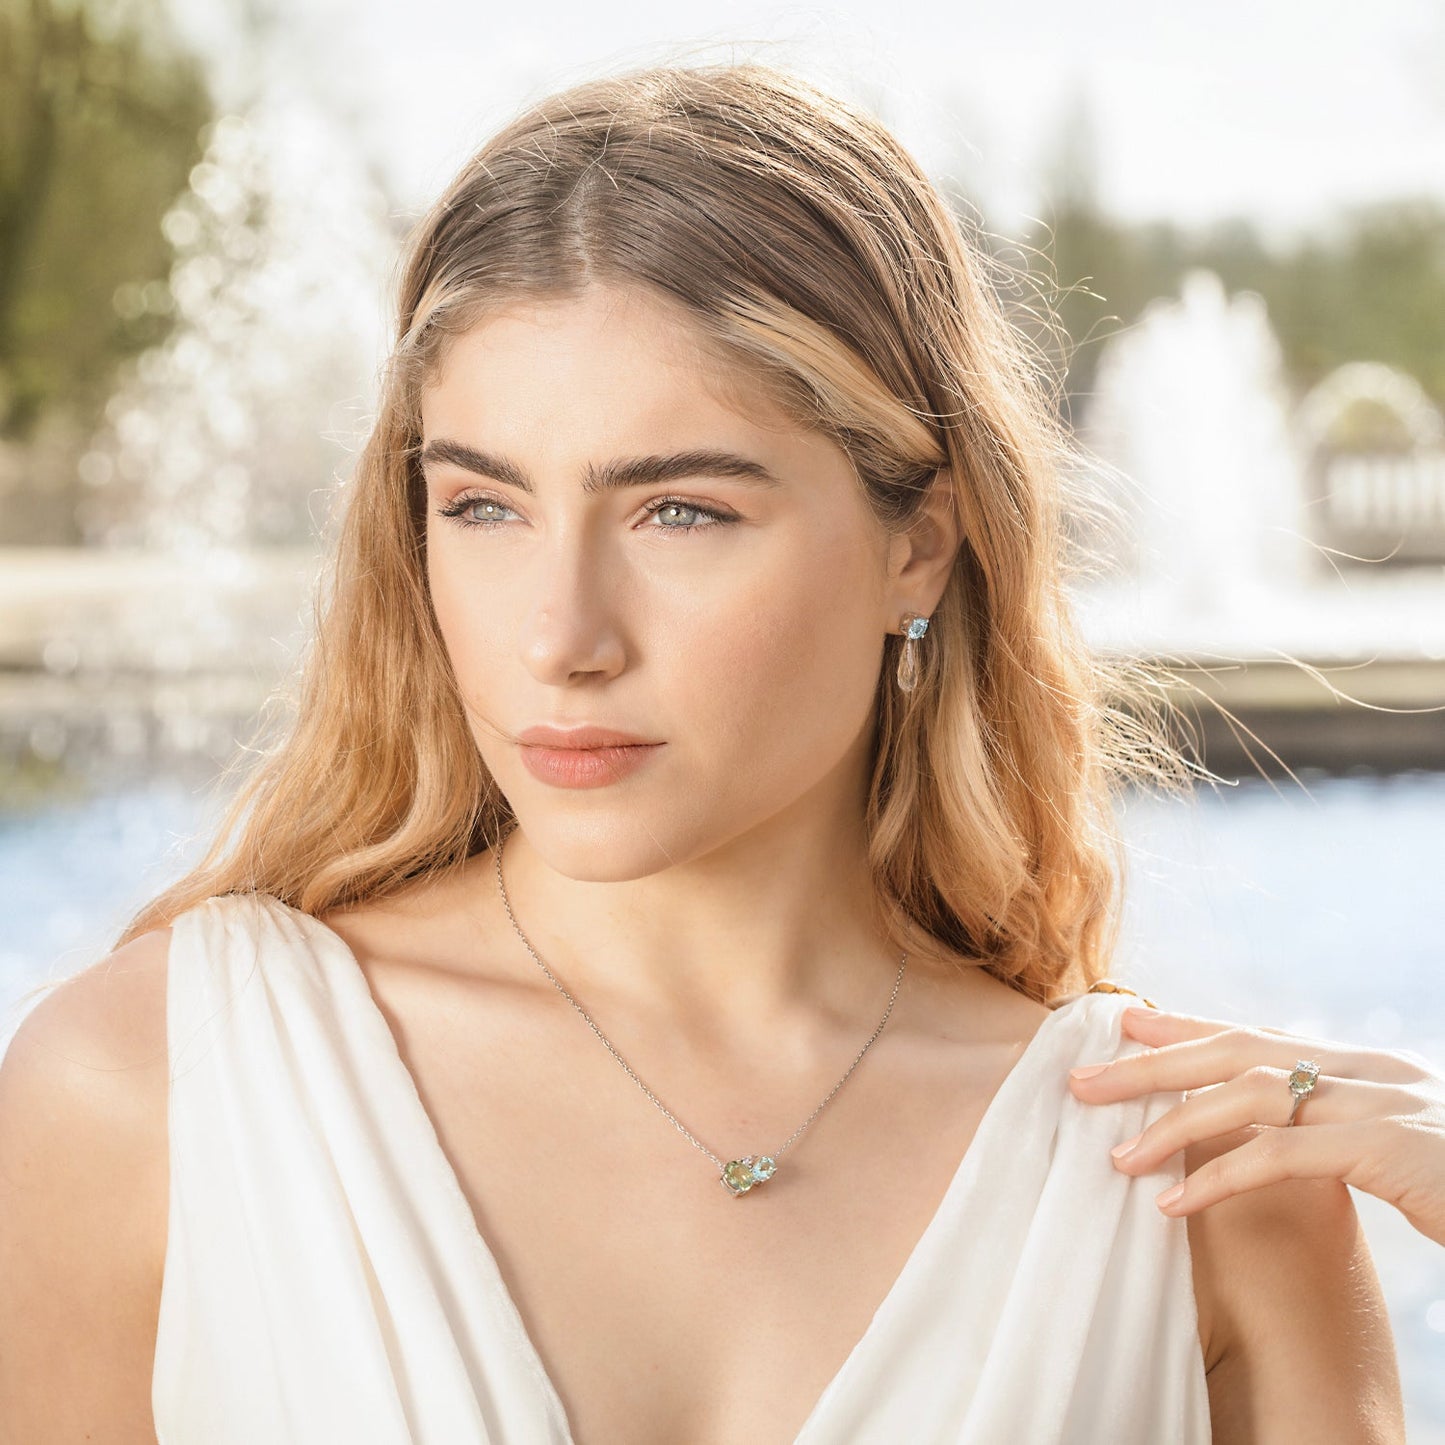 British Jewellers designed London-made custom gold jewellery – Model demonstrating the wear of the Green Amethyst and Aquamarine Drop Earrings and the Green Amethyst Silver Cluster Necklace – Como Collection, Augustine Jewellery, British Jewellers, Gemstone Jewellery, Luxury Jewellery London.